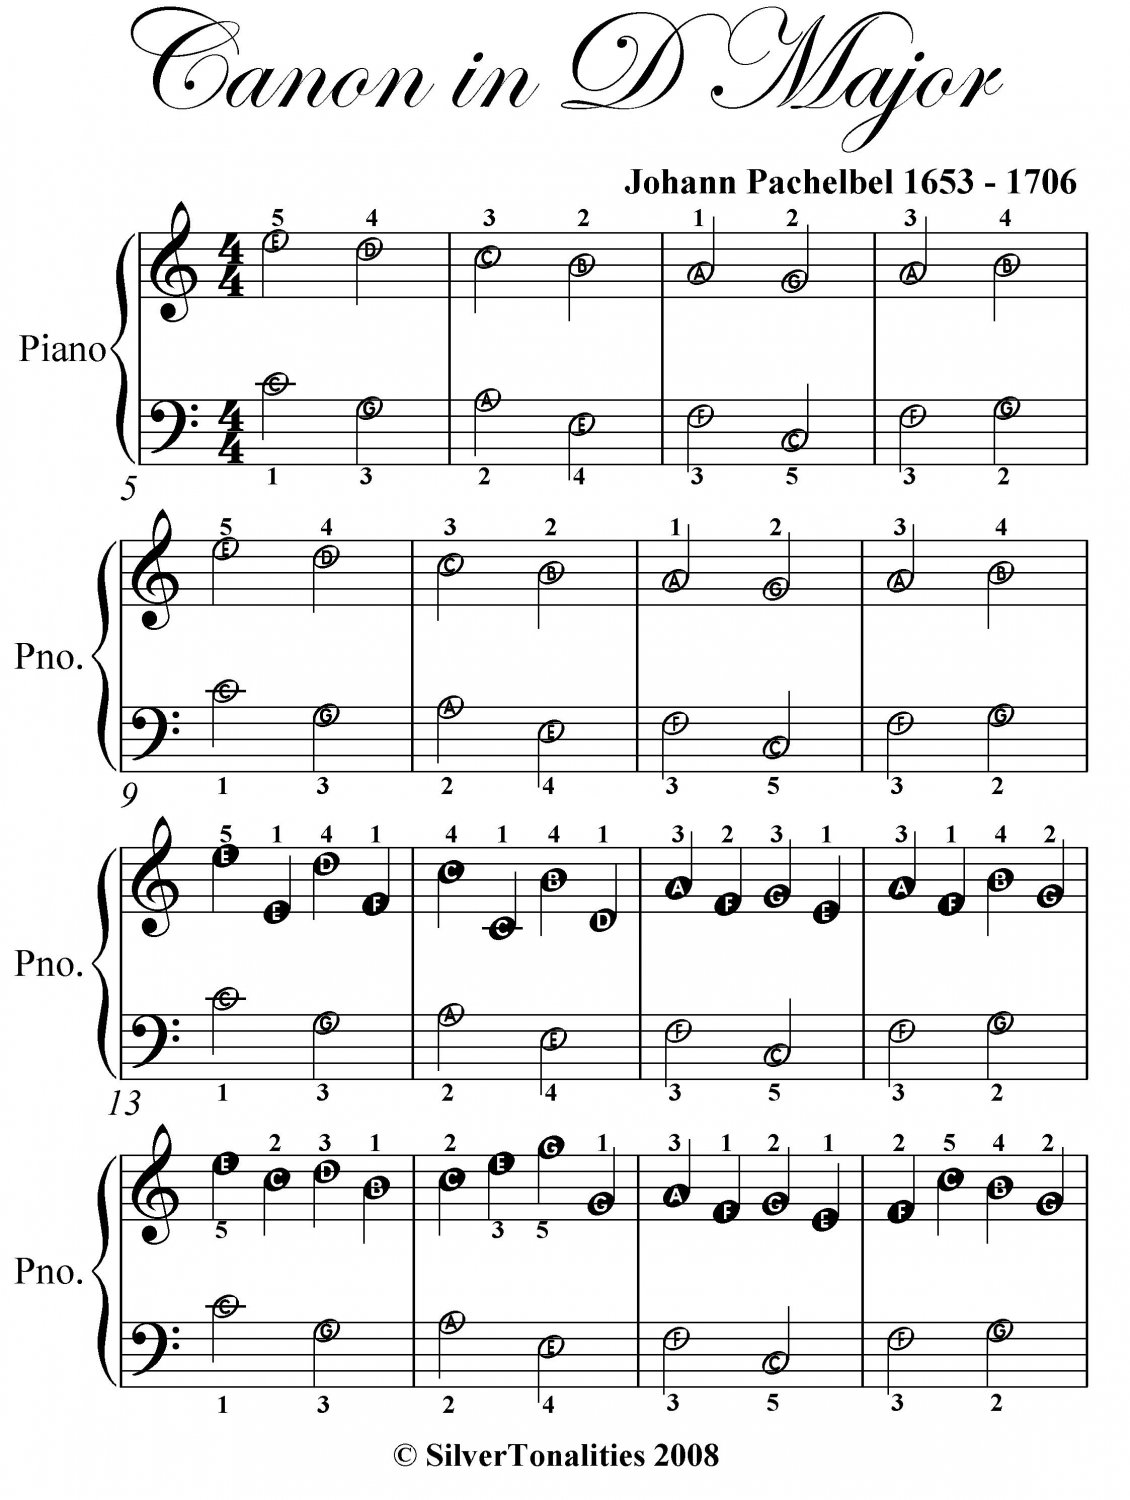 Canon In D Piano Sheet Music Free Printable - Printable Word Searches